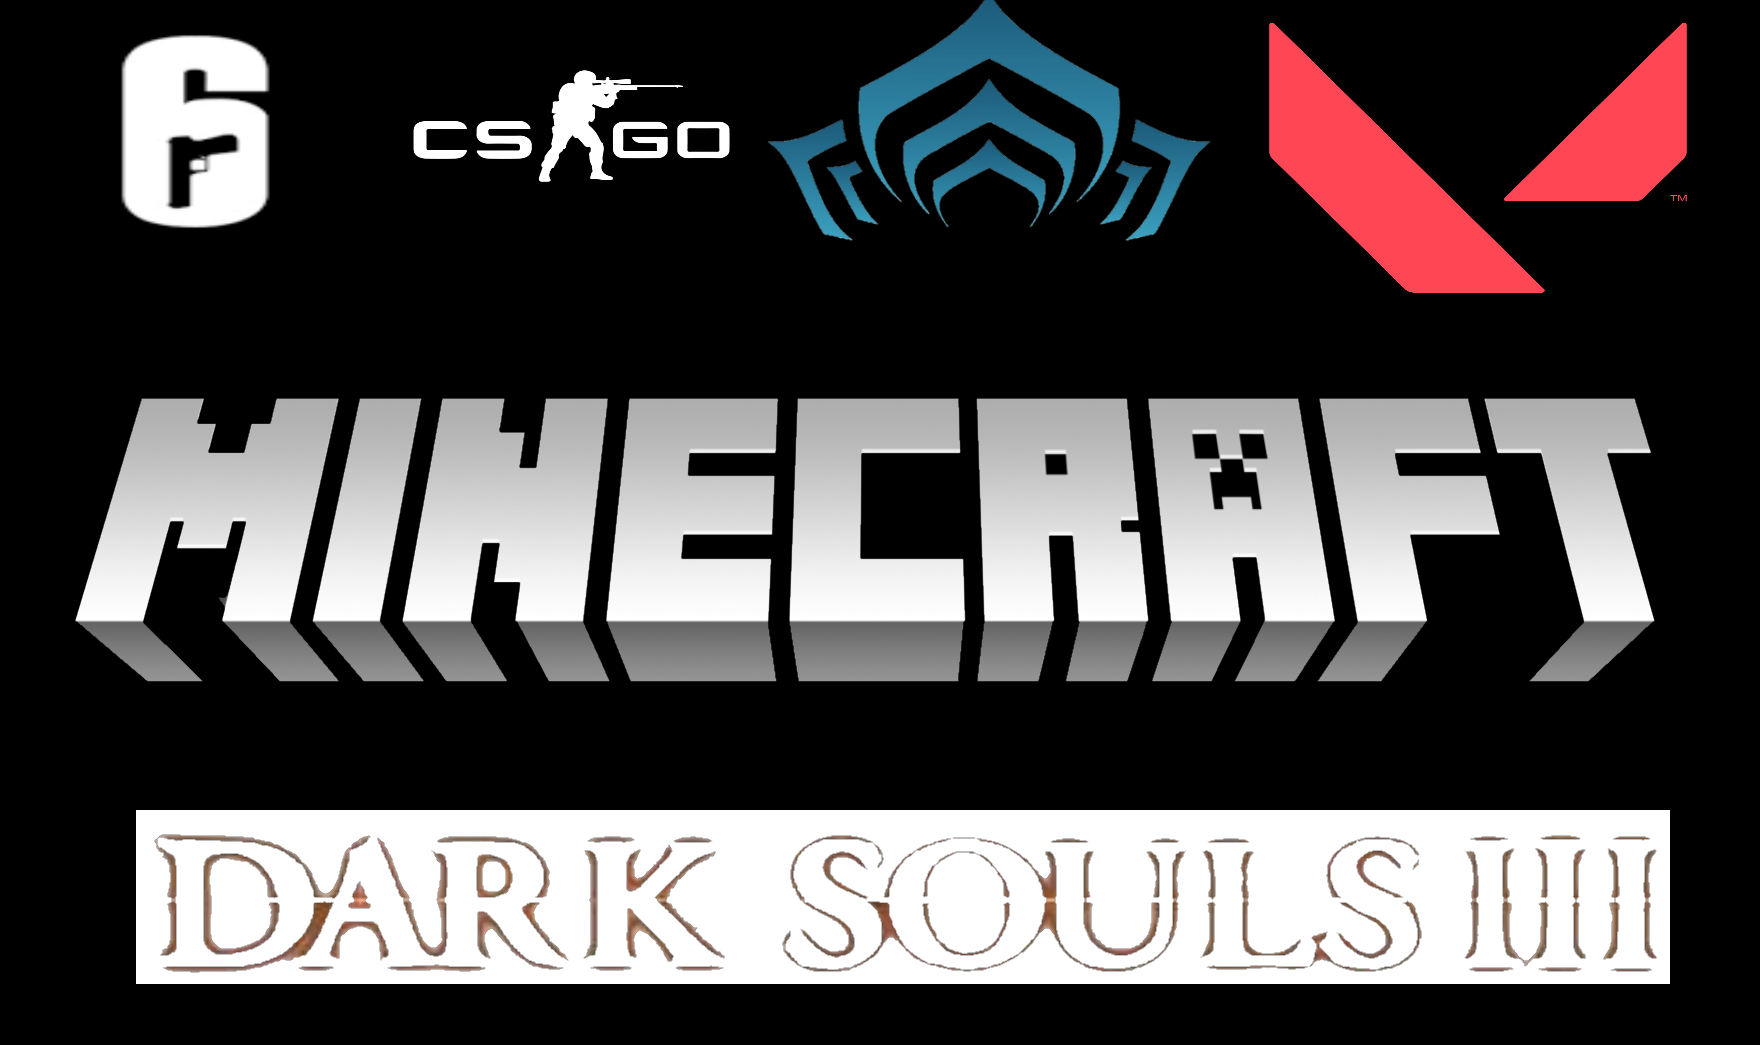 List of games we play as a group: Minecraft, Dark Souls 3, Valorant, Rainbow Six: Siege, and Warframe